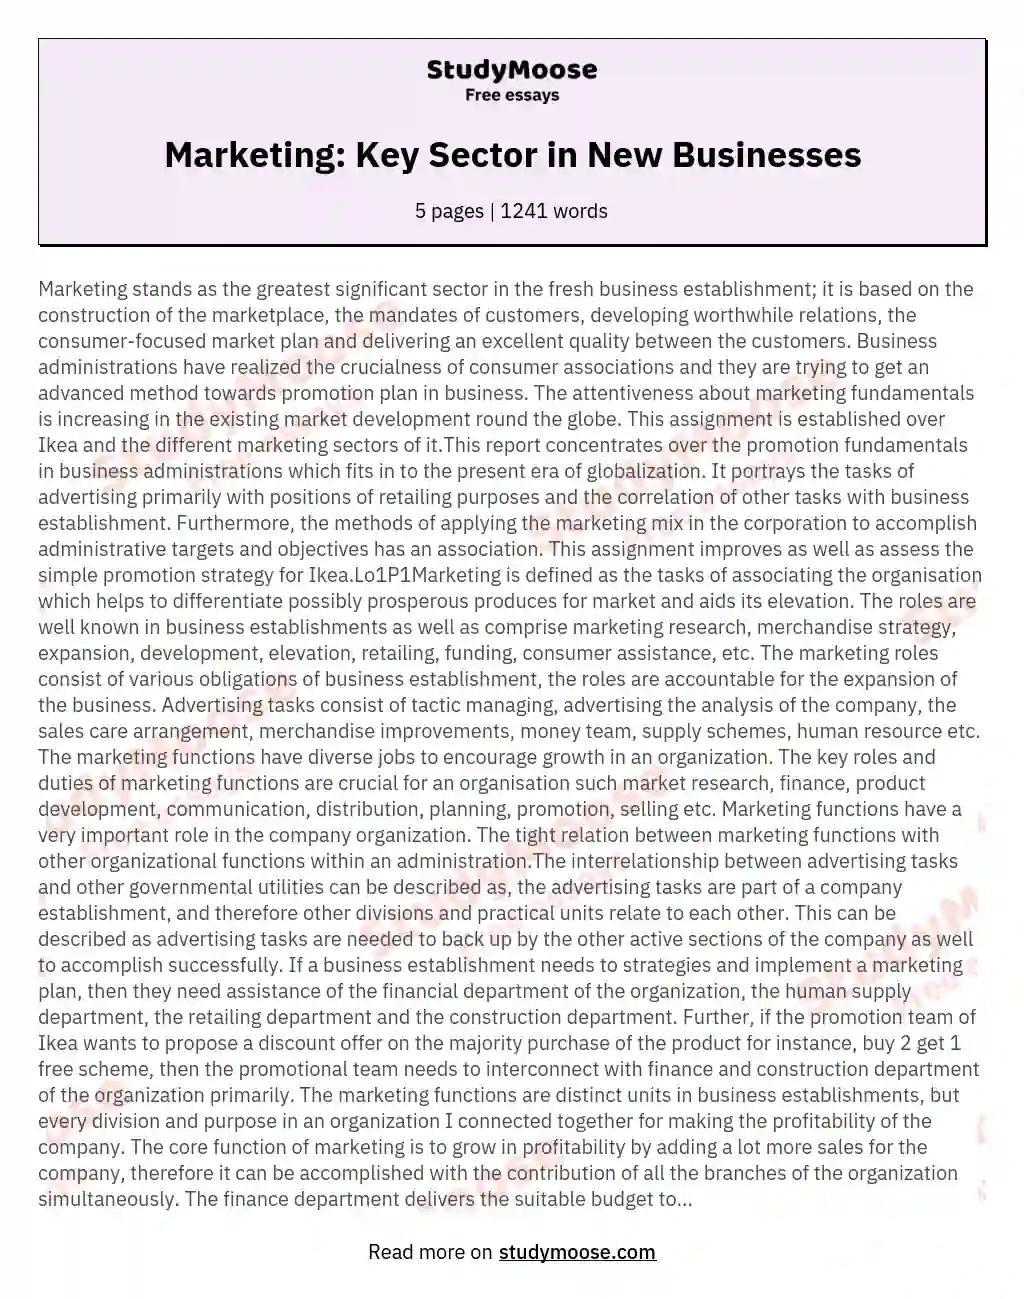 Marketing: Key Sector in New Businesses